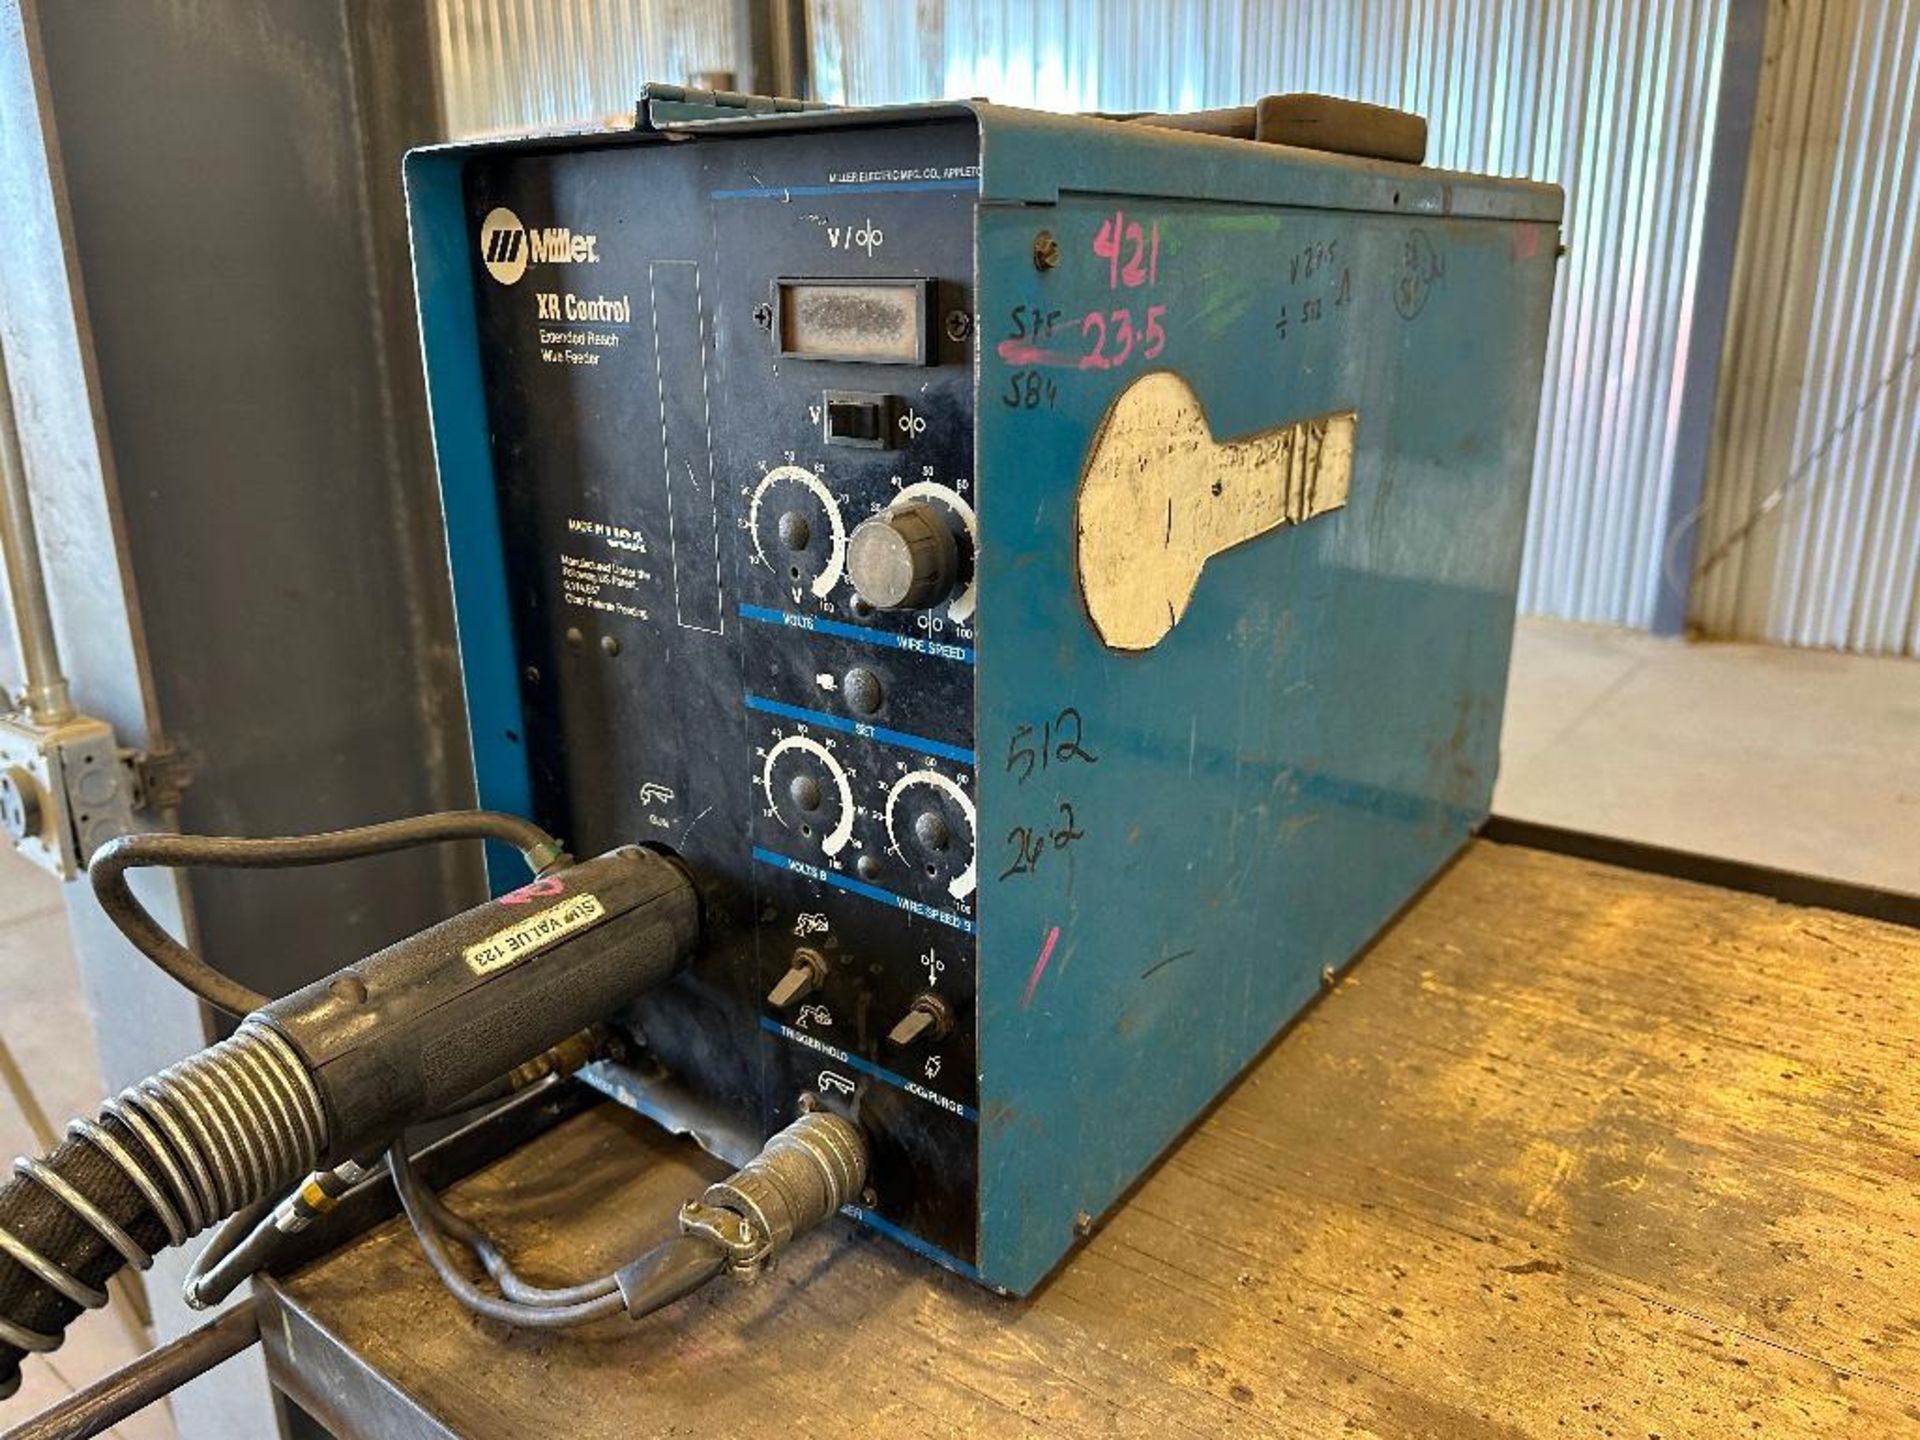 Lot of Miller Invision 450 MPa Welder, Miller XR Control Extended Reach Wire Feeder, Miller Pistol, - Image 7 of 13